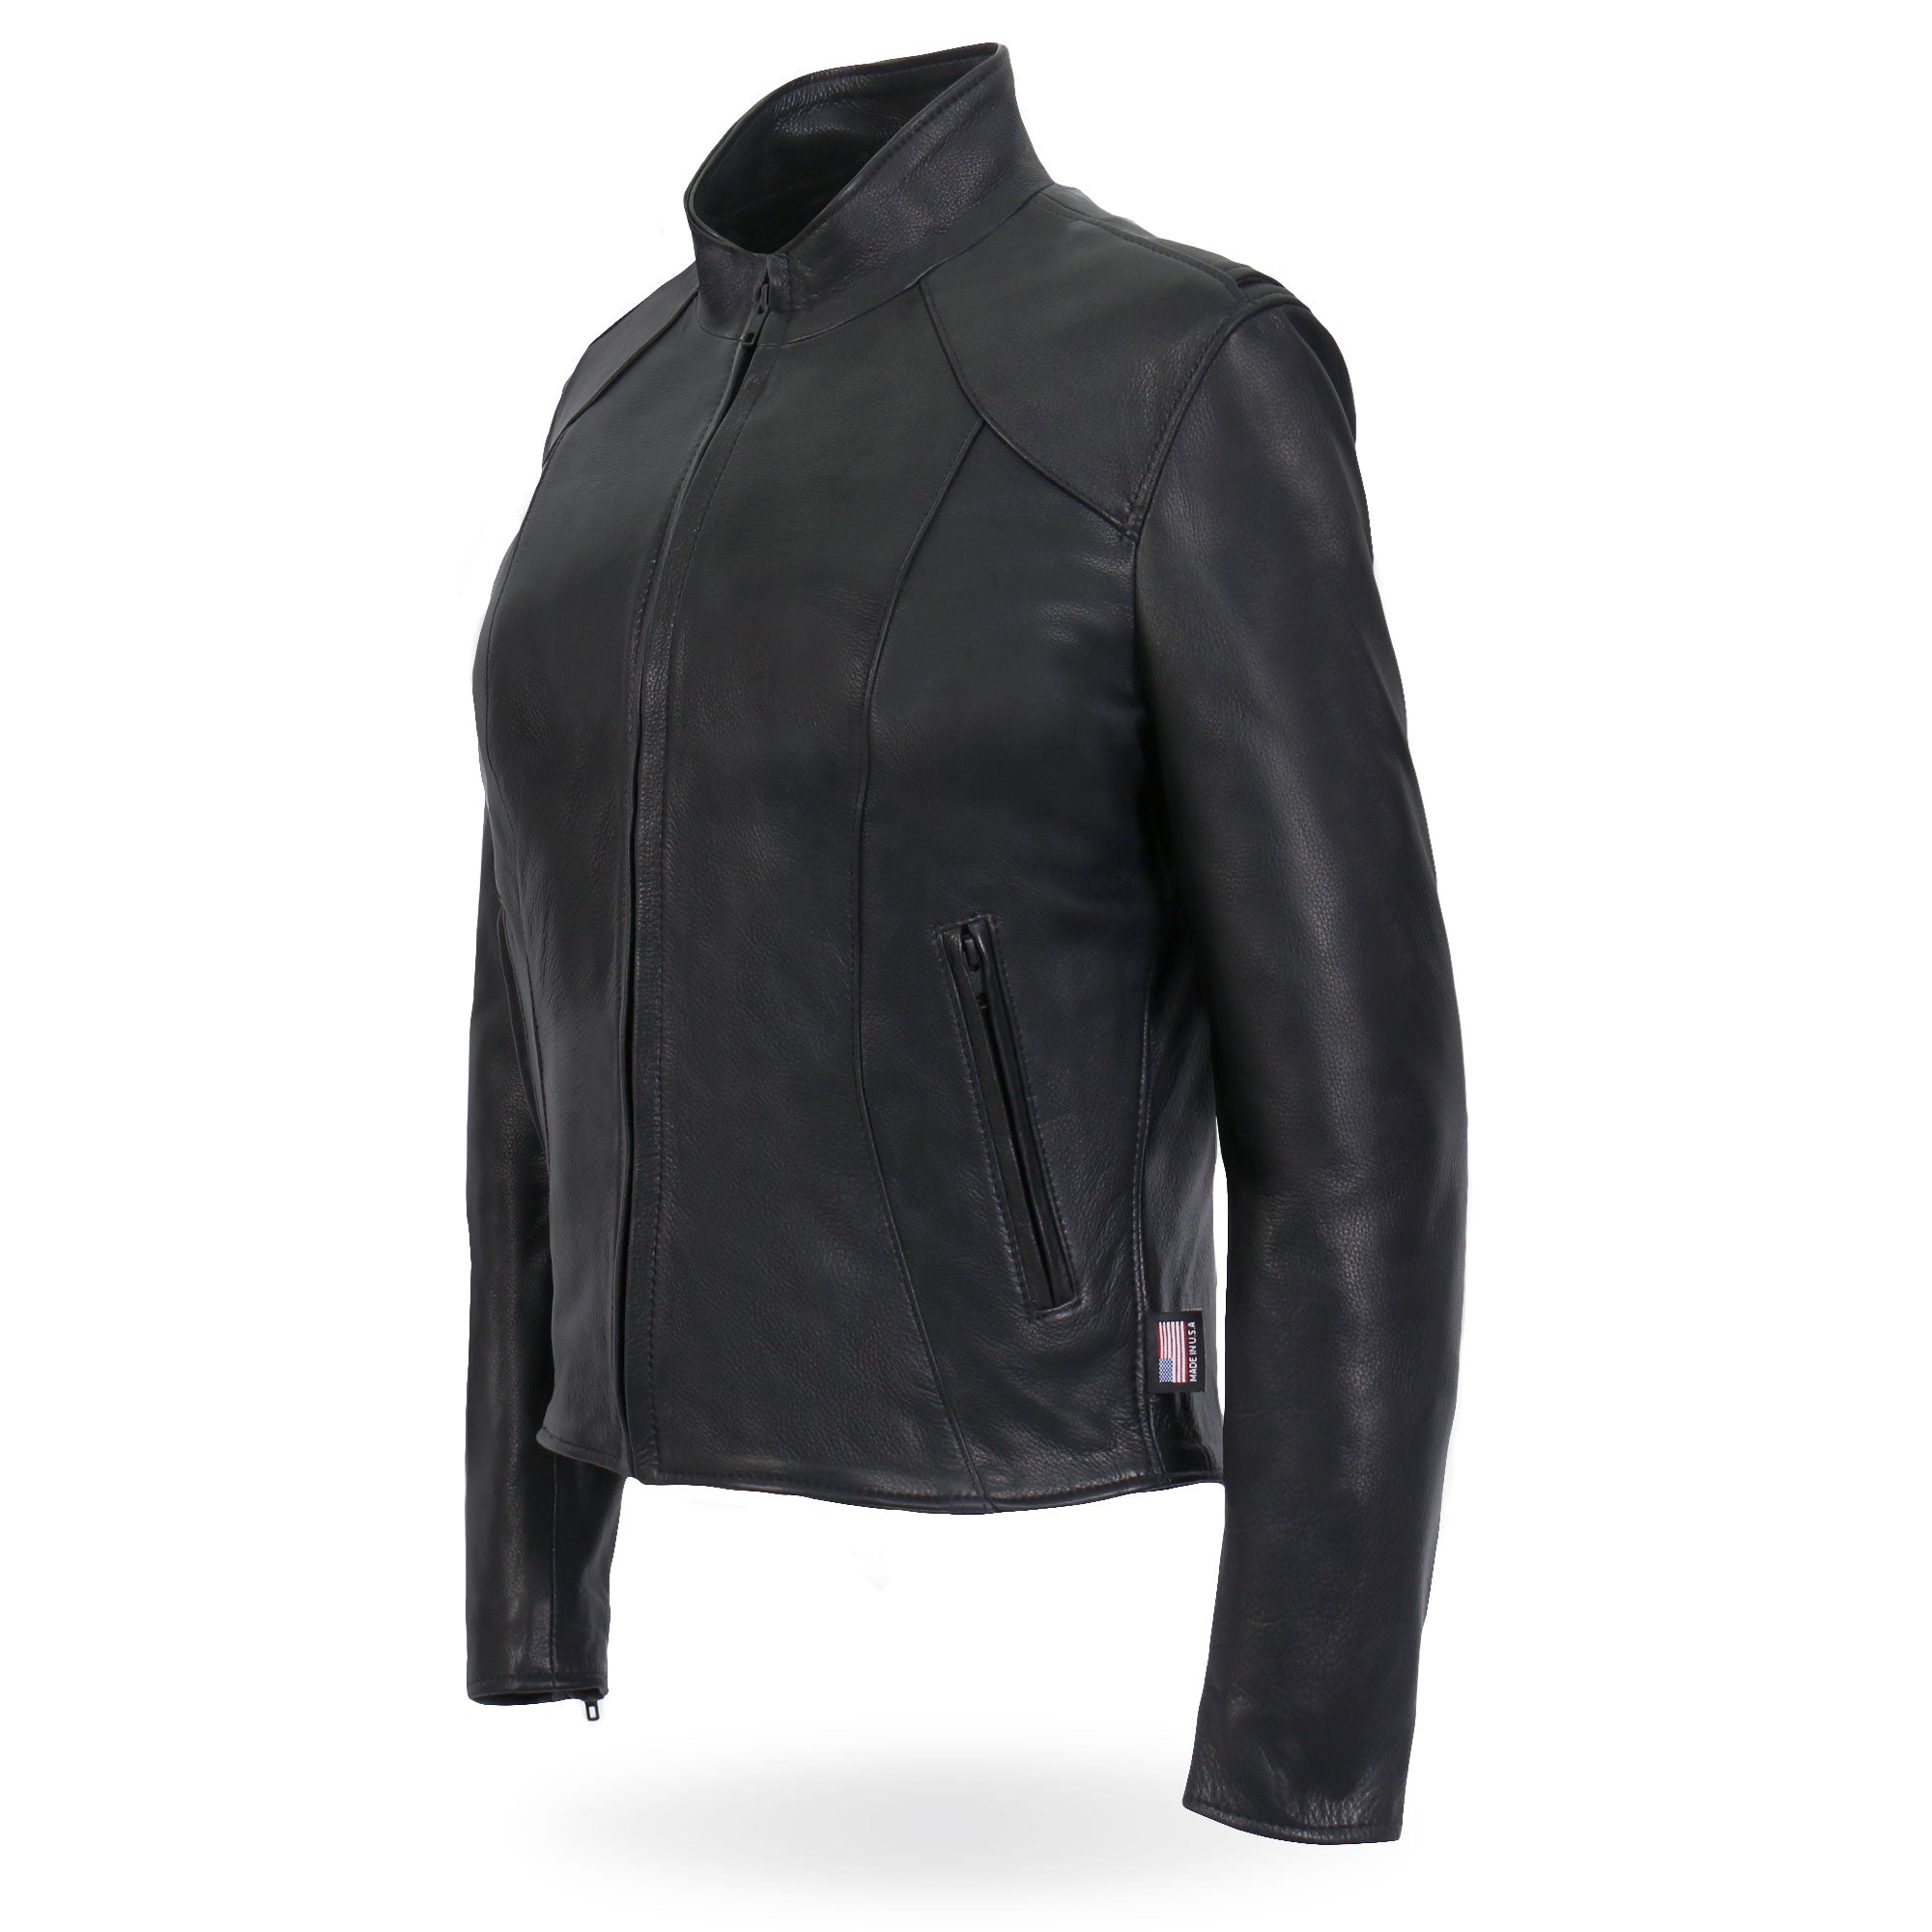 Hot Leathers JKL5003 USA Made Ladies Clean Cut Leather Motorcycle Biker Jacket